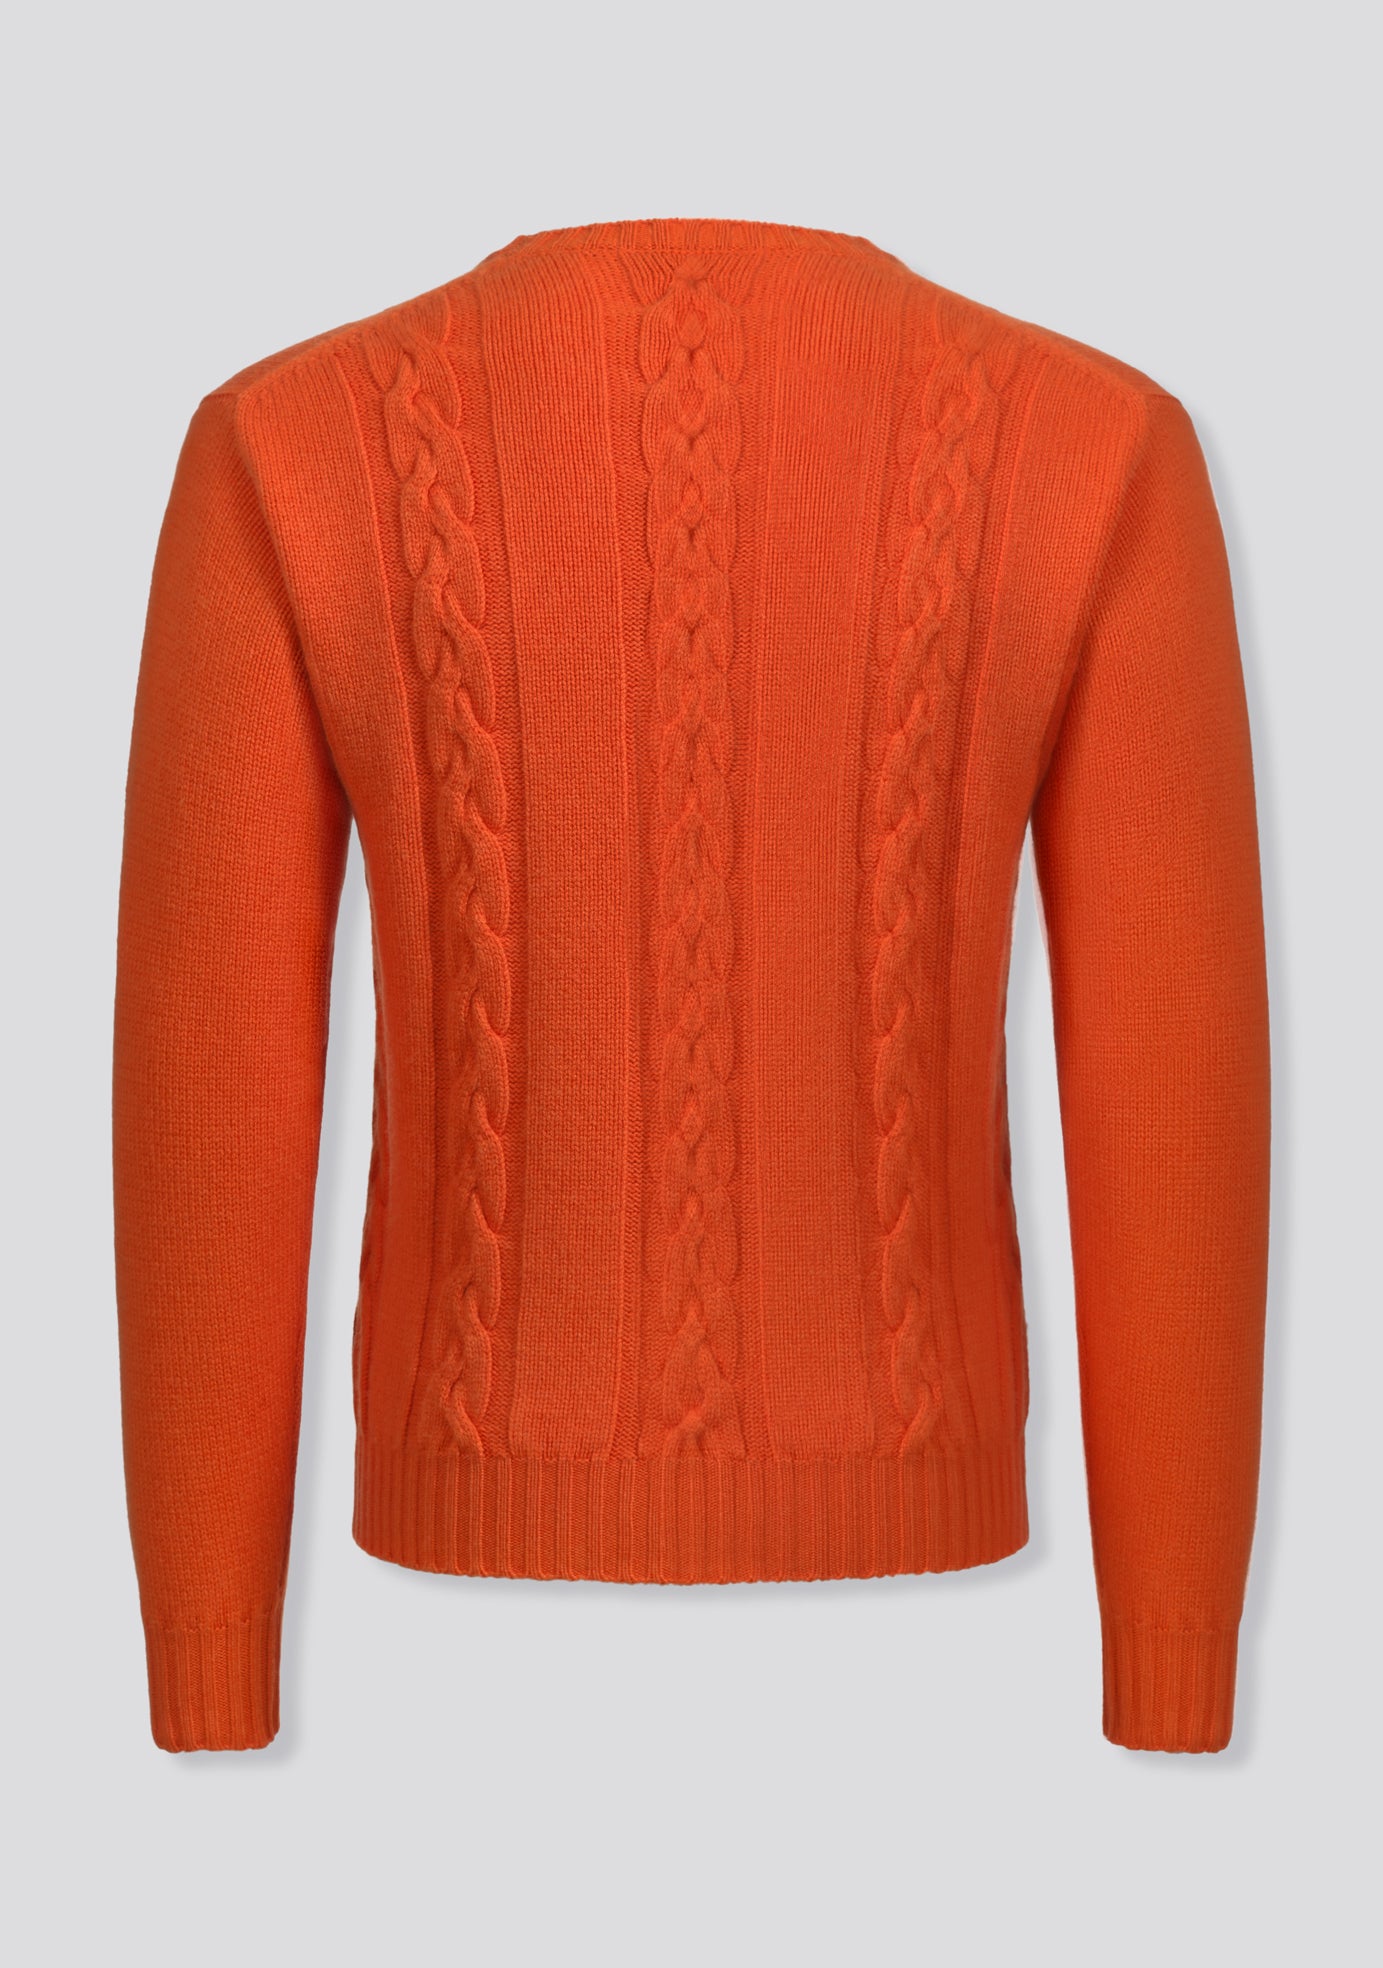 Orange Crew-neck Sweater in Cashmere and Lana Wool